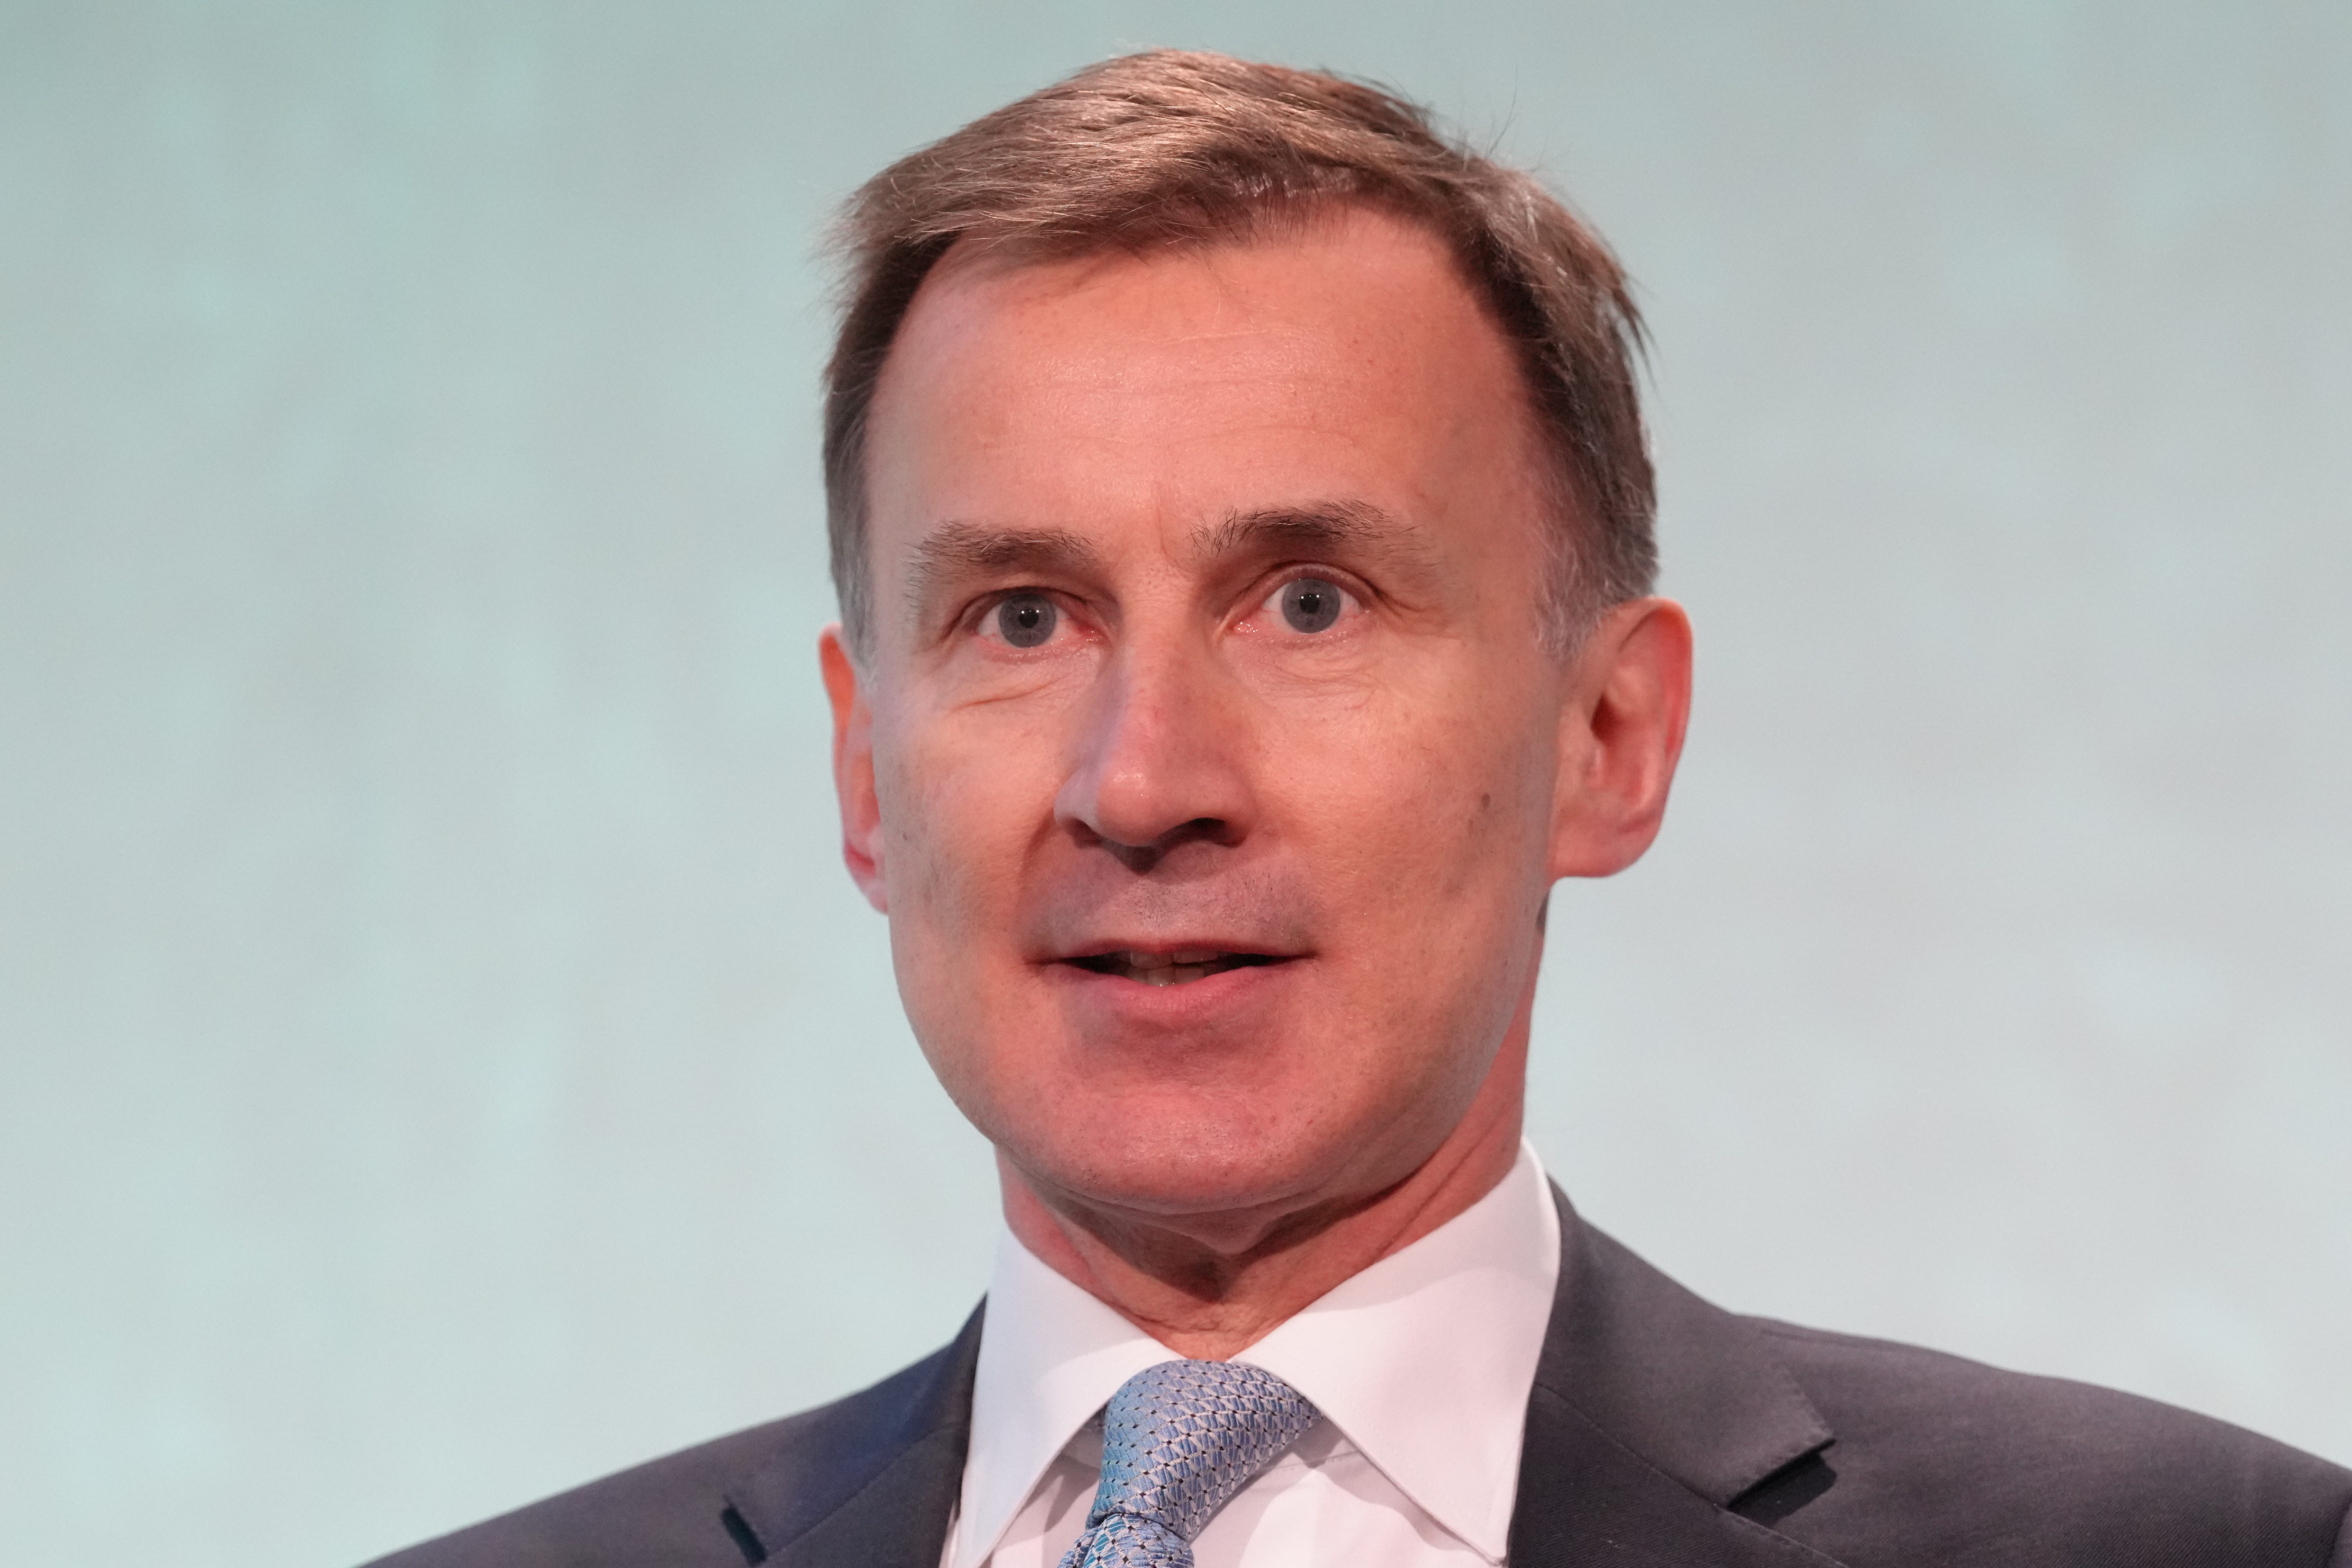 Jeremy Hunt said it would be inappropriate to comment on Nick Read’s position while an investigation was ongoing (Maja Smiejkowska/PA)